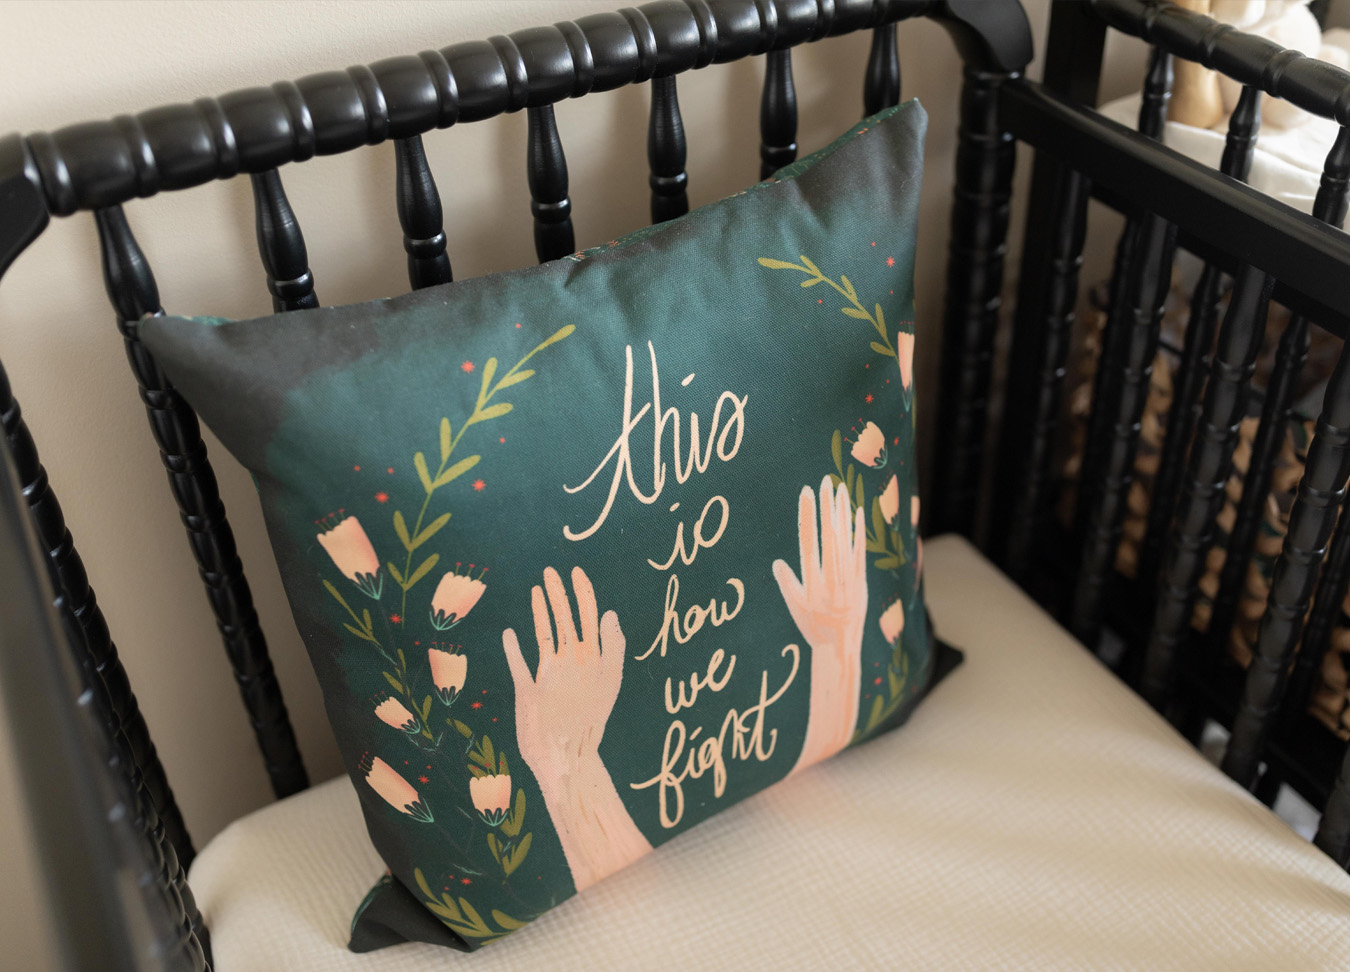 green pillow with the phrase "this is how we fight" is sitting in a black crib.